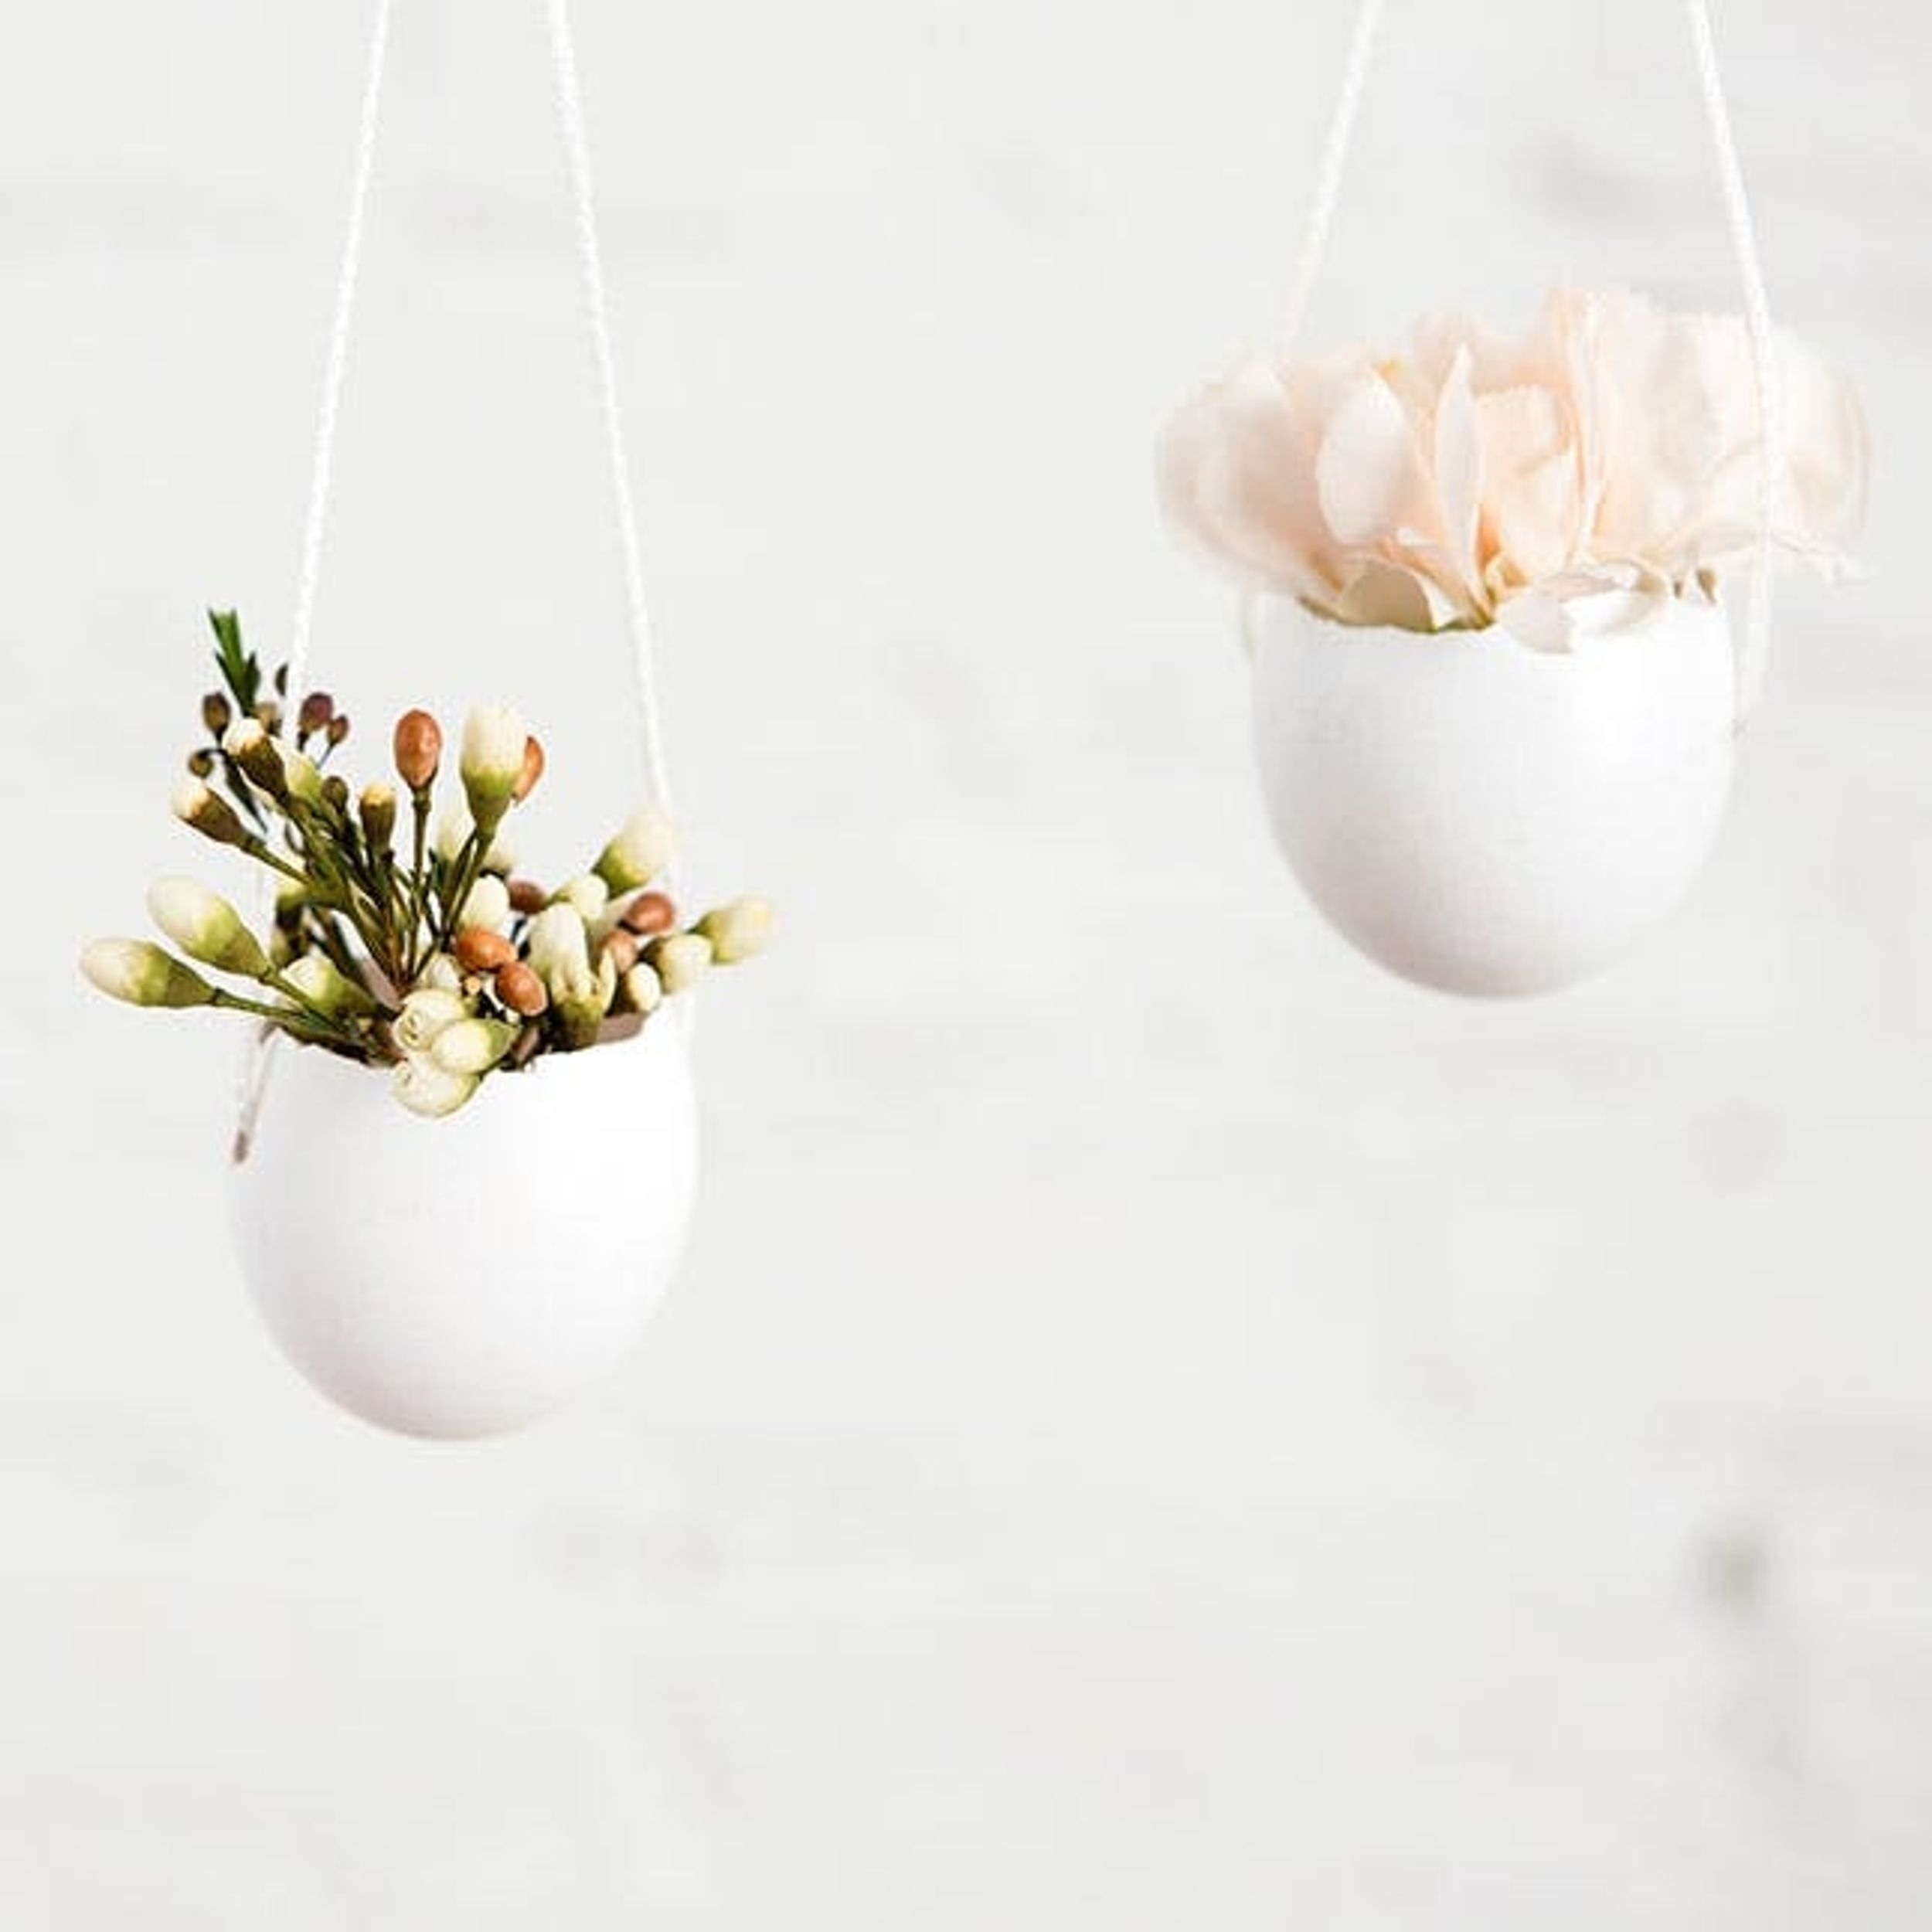 How to Turn Eggshells into Hanging Planters for Spring Flowers